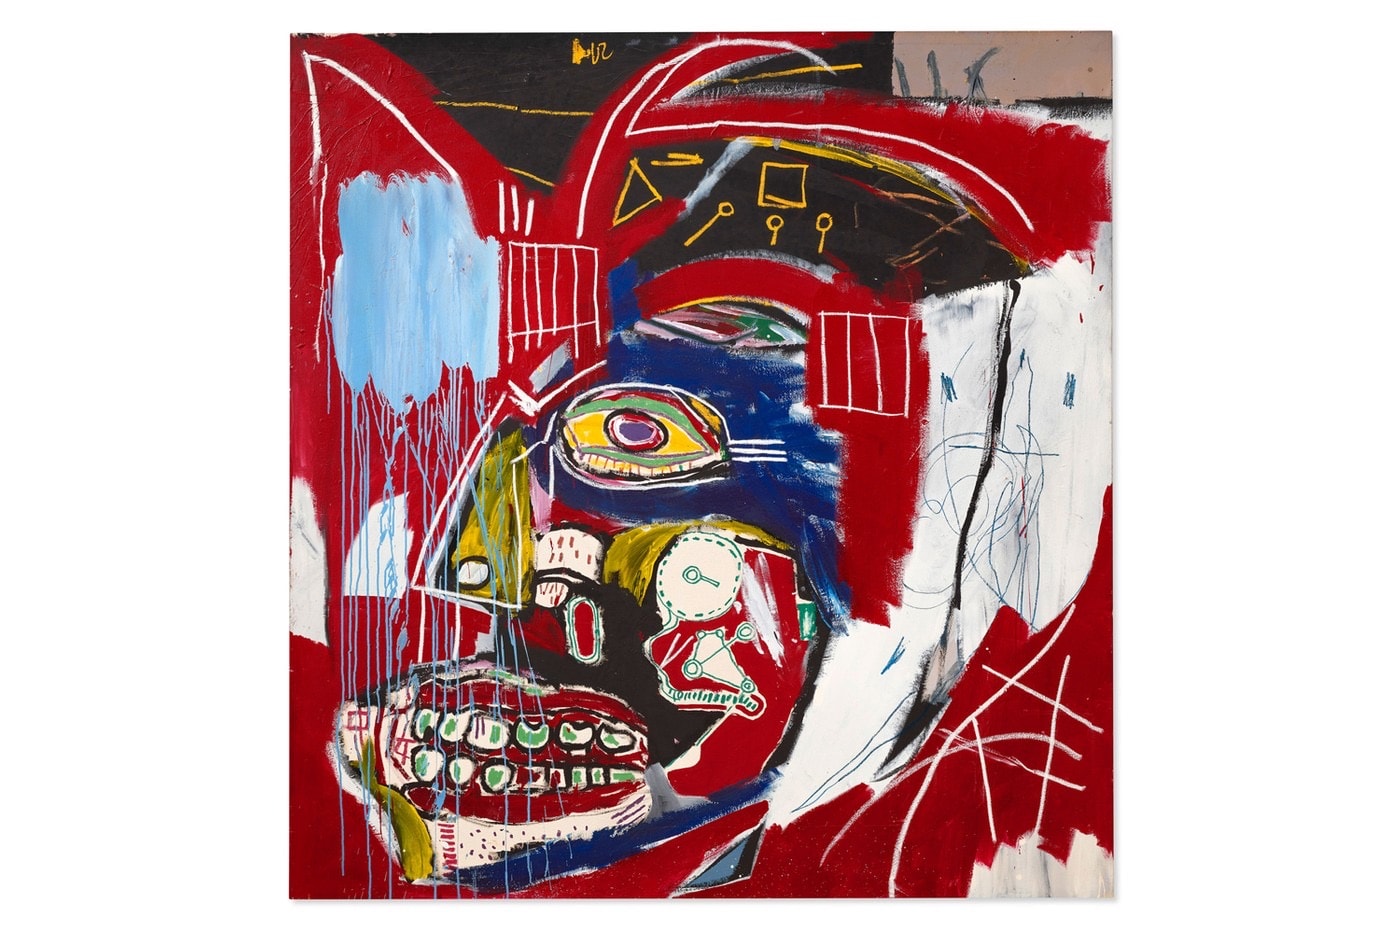 Jean-Michel Basquiat’s four key words in his paintings and his exploration of ethnic issues in the 1980s